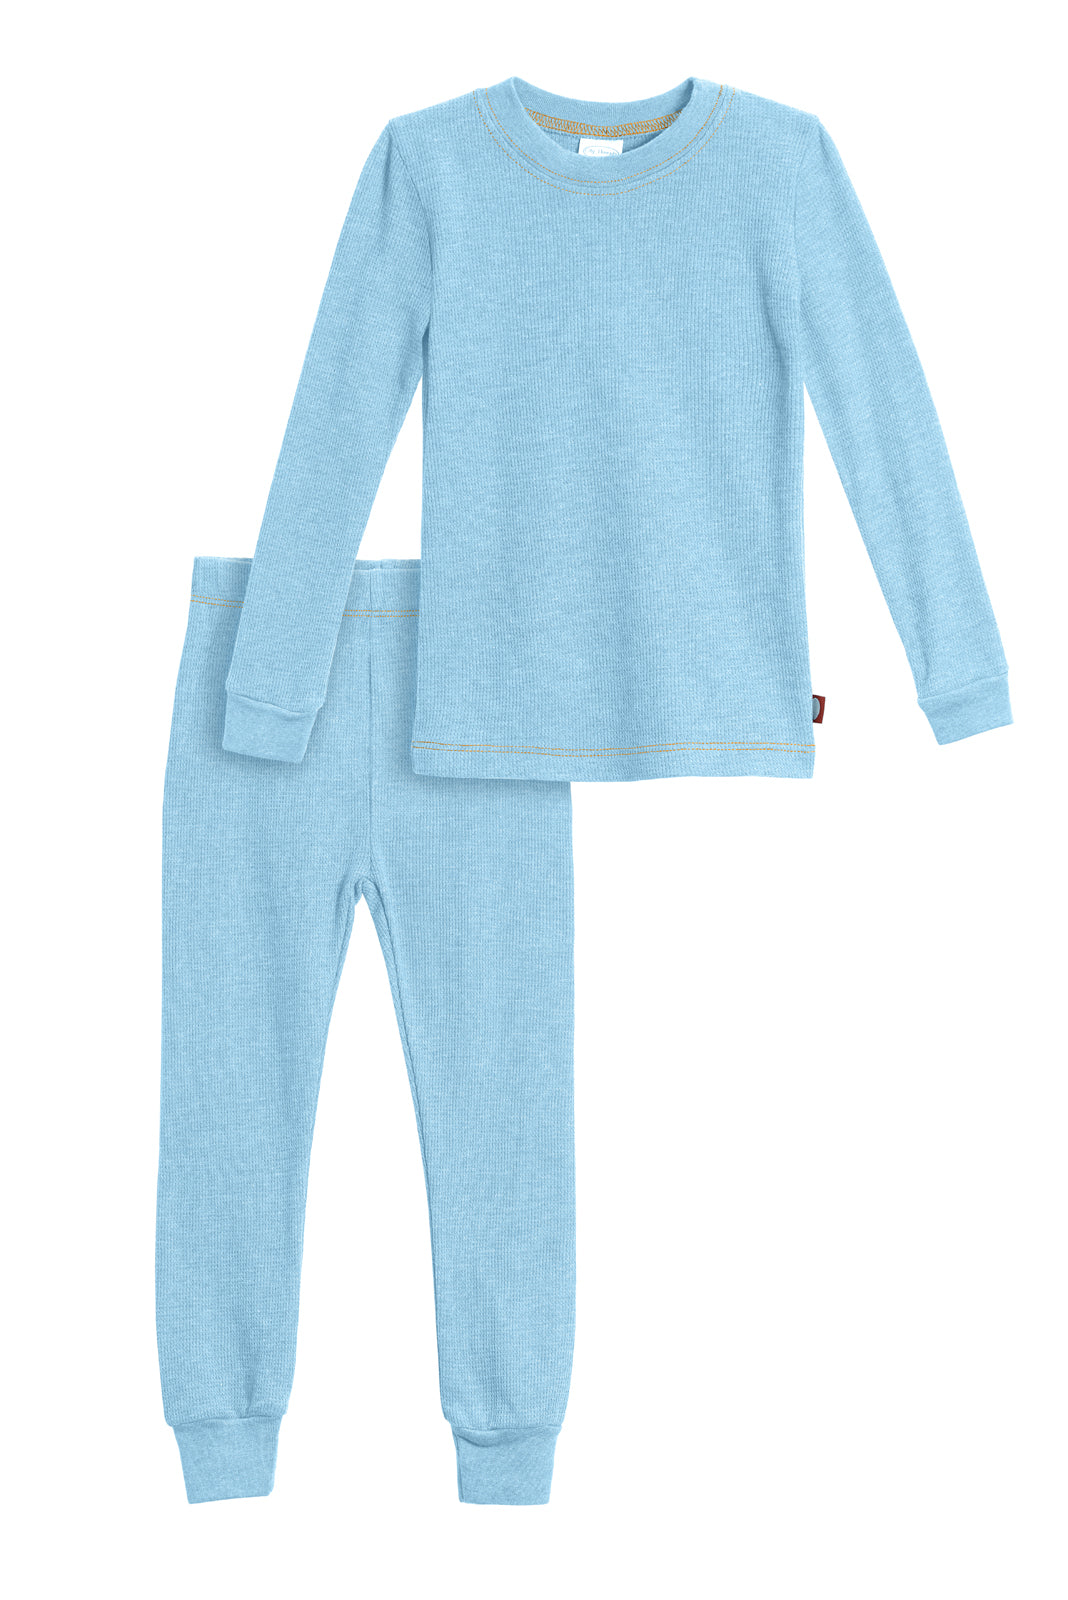 Baby Blue Women's Thermals Long Johns Underwear Set:S at  Women's  Clothing store